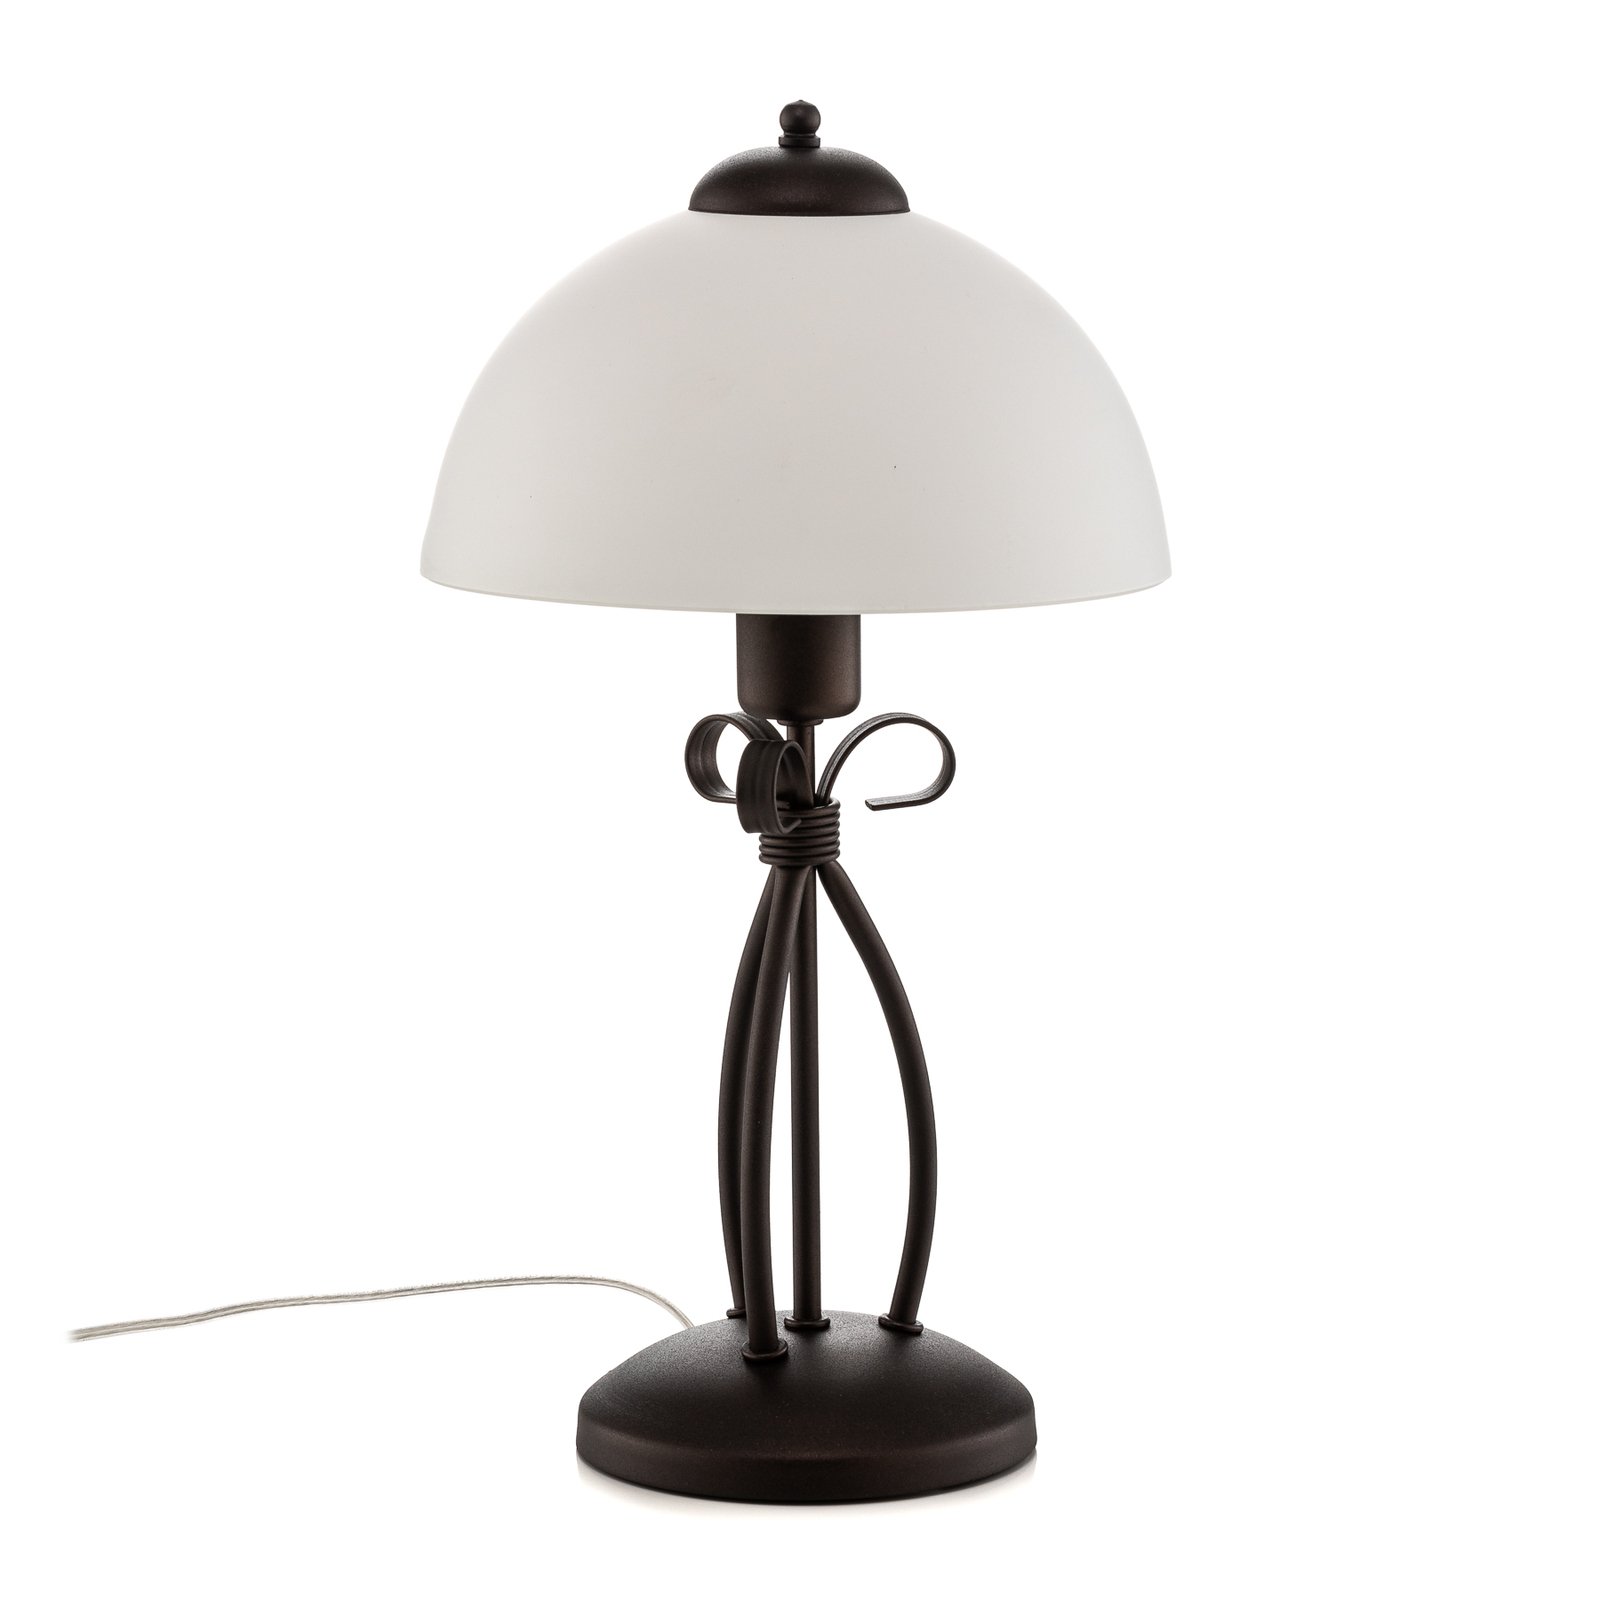 Adoro table lamp with a glass lampshade, brown